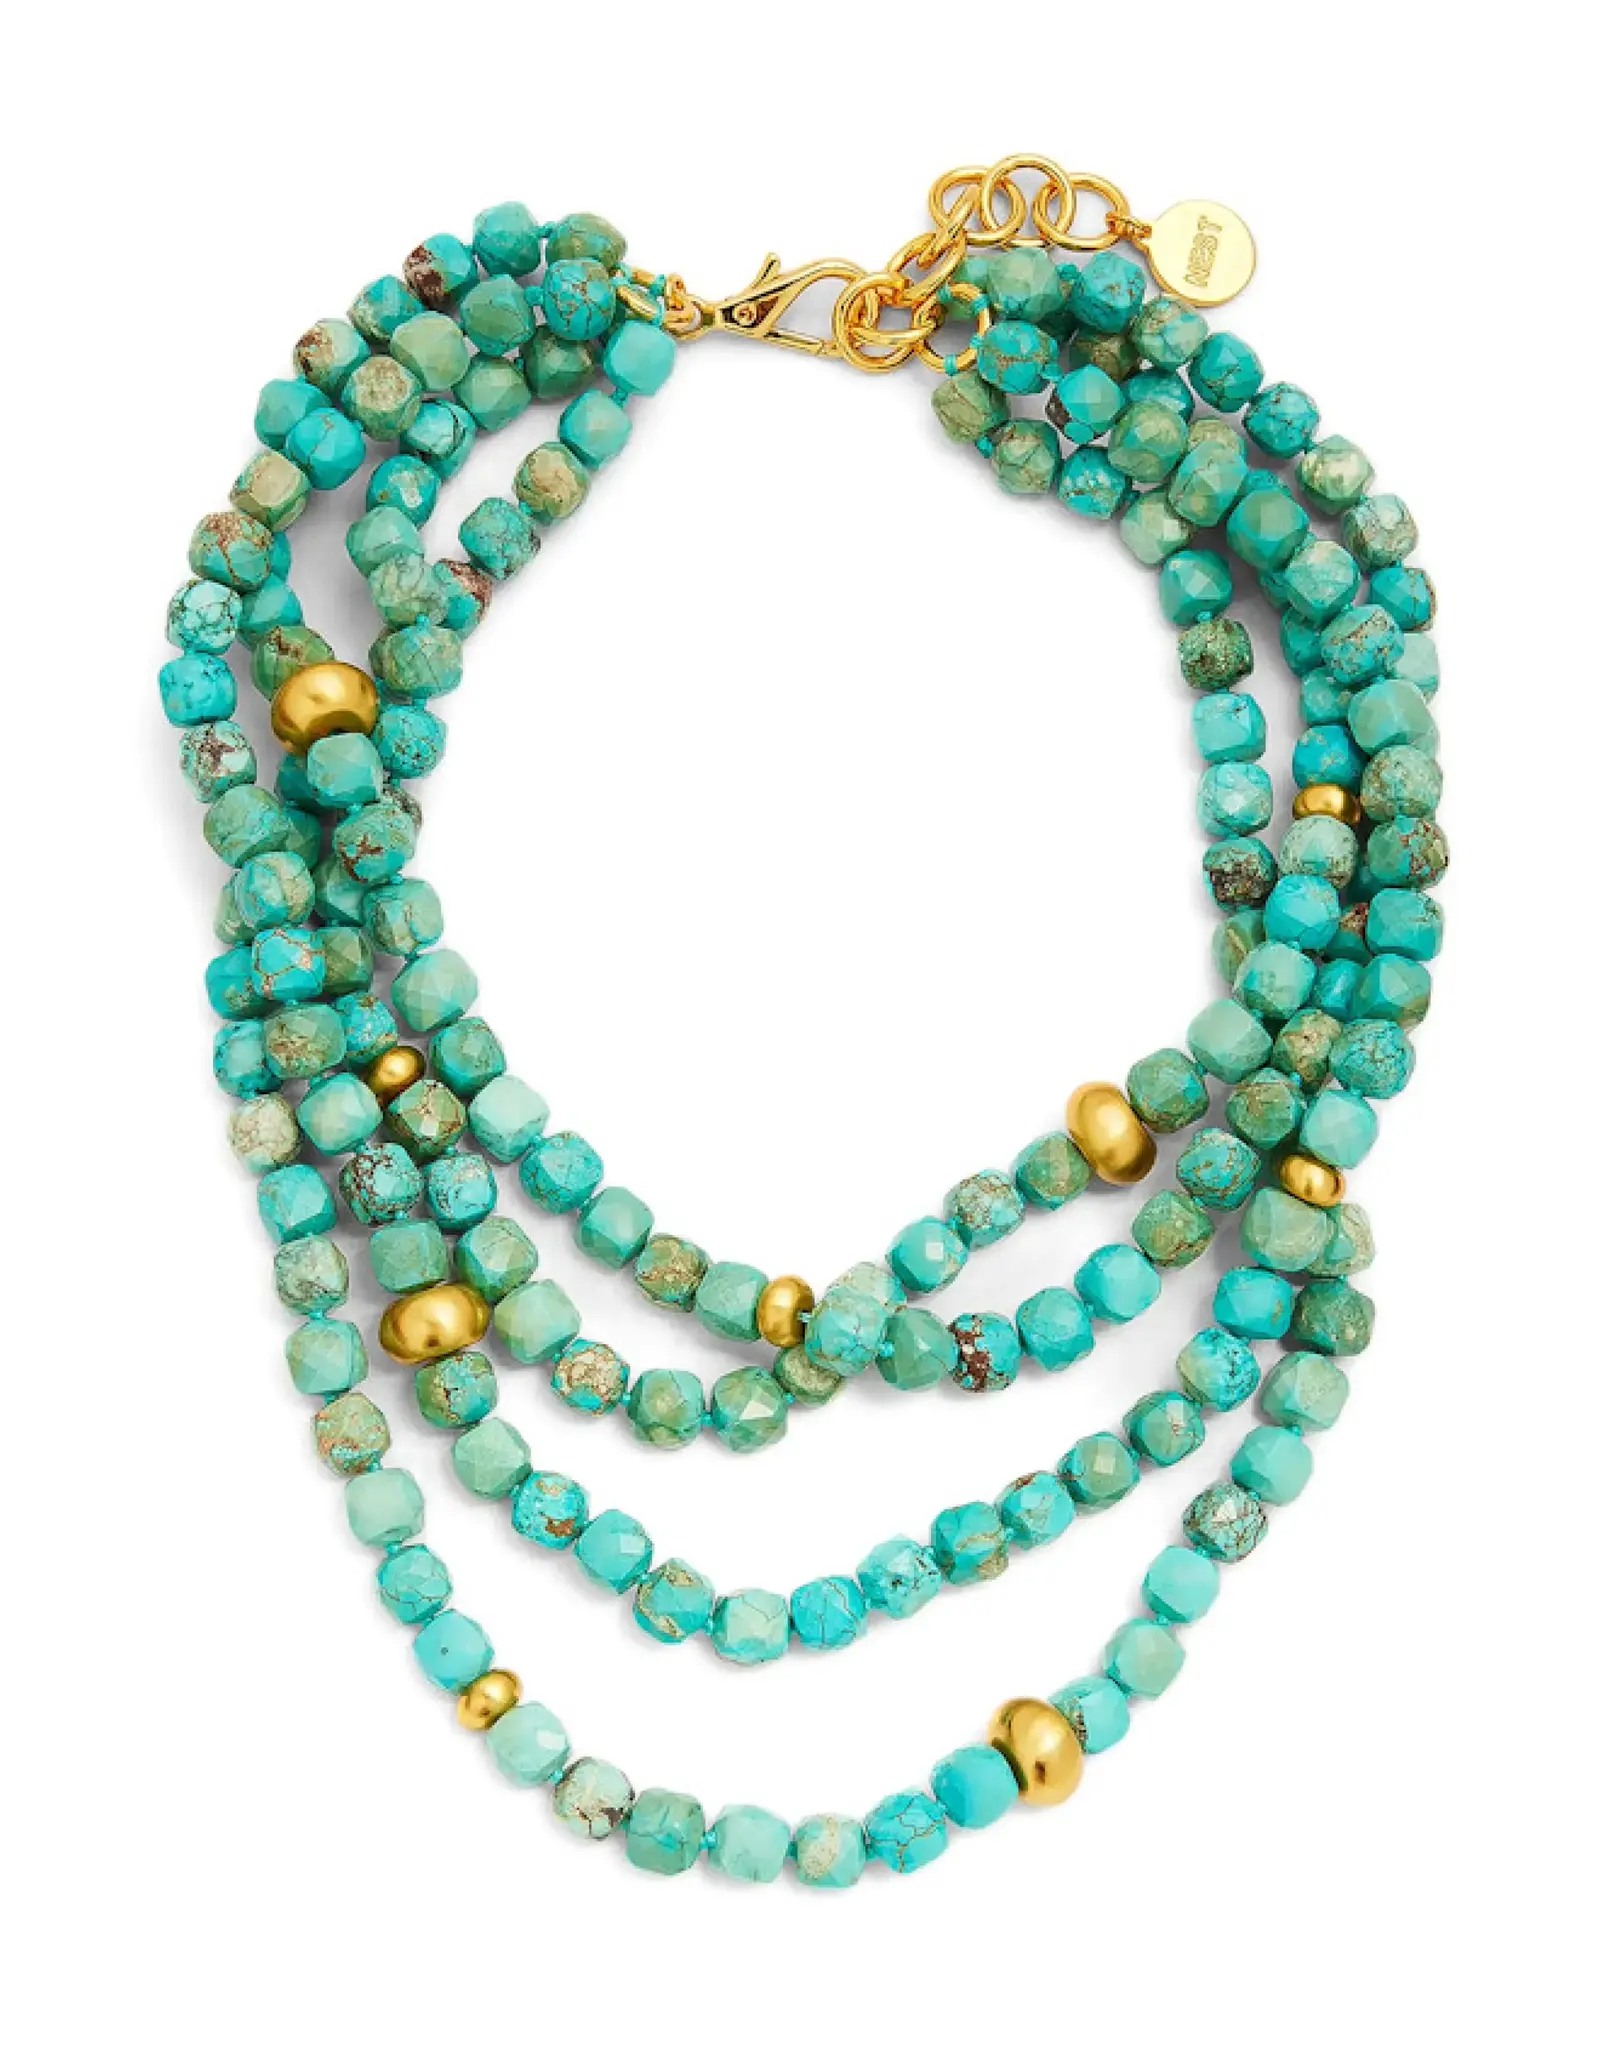 NEST Jewelry NEST Turquoise Magnesite Brushed Accent Necklace